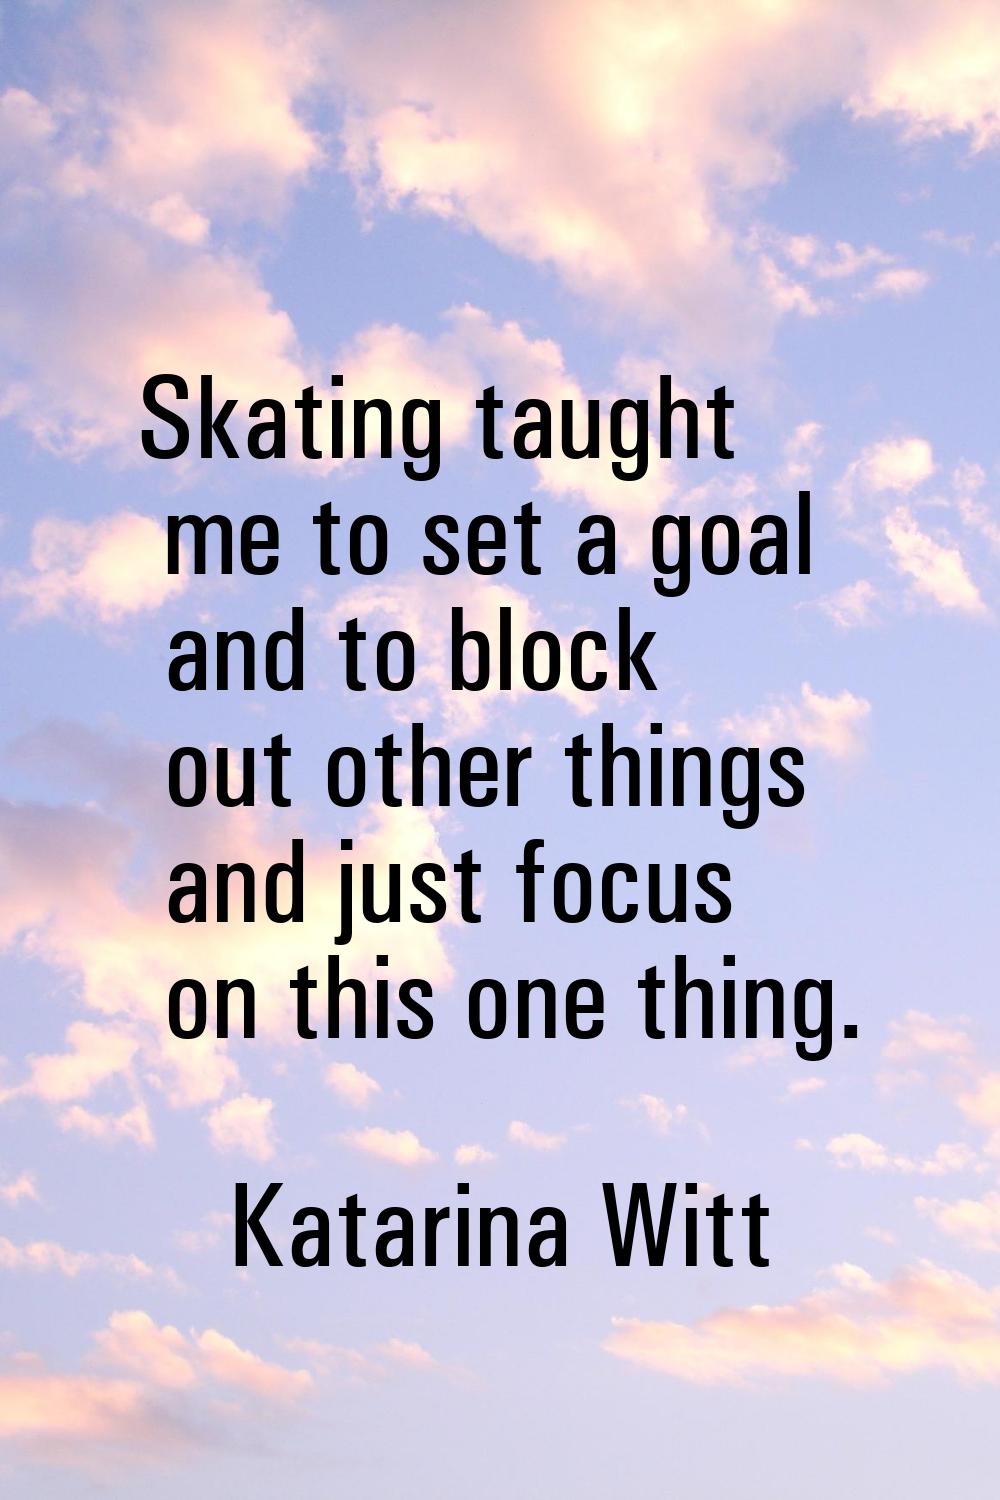 Skating taught me to set a goal and to block out other things and just focus on this one thing.